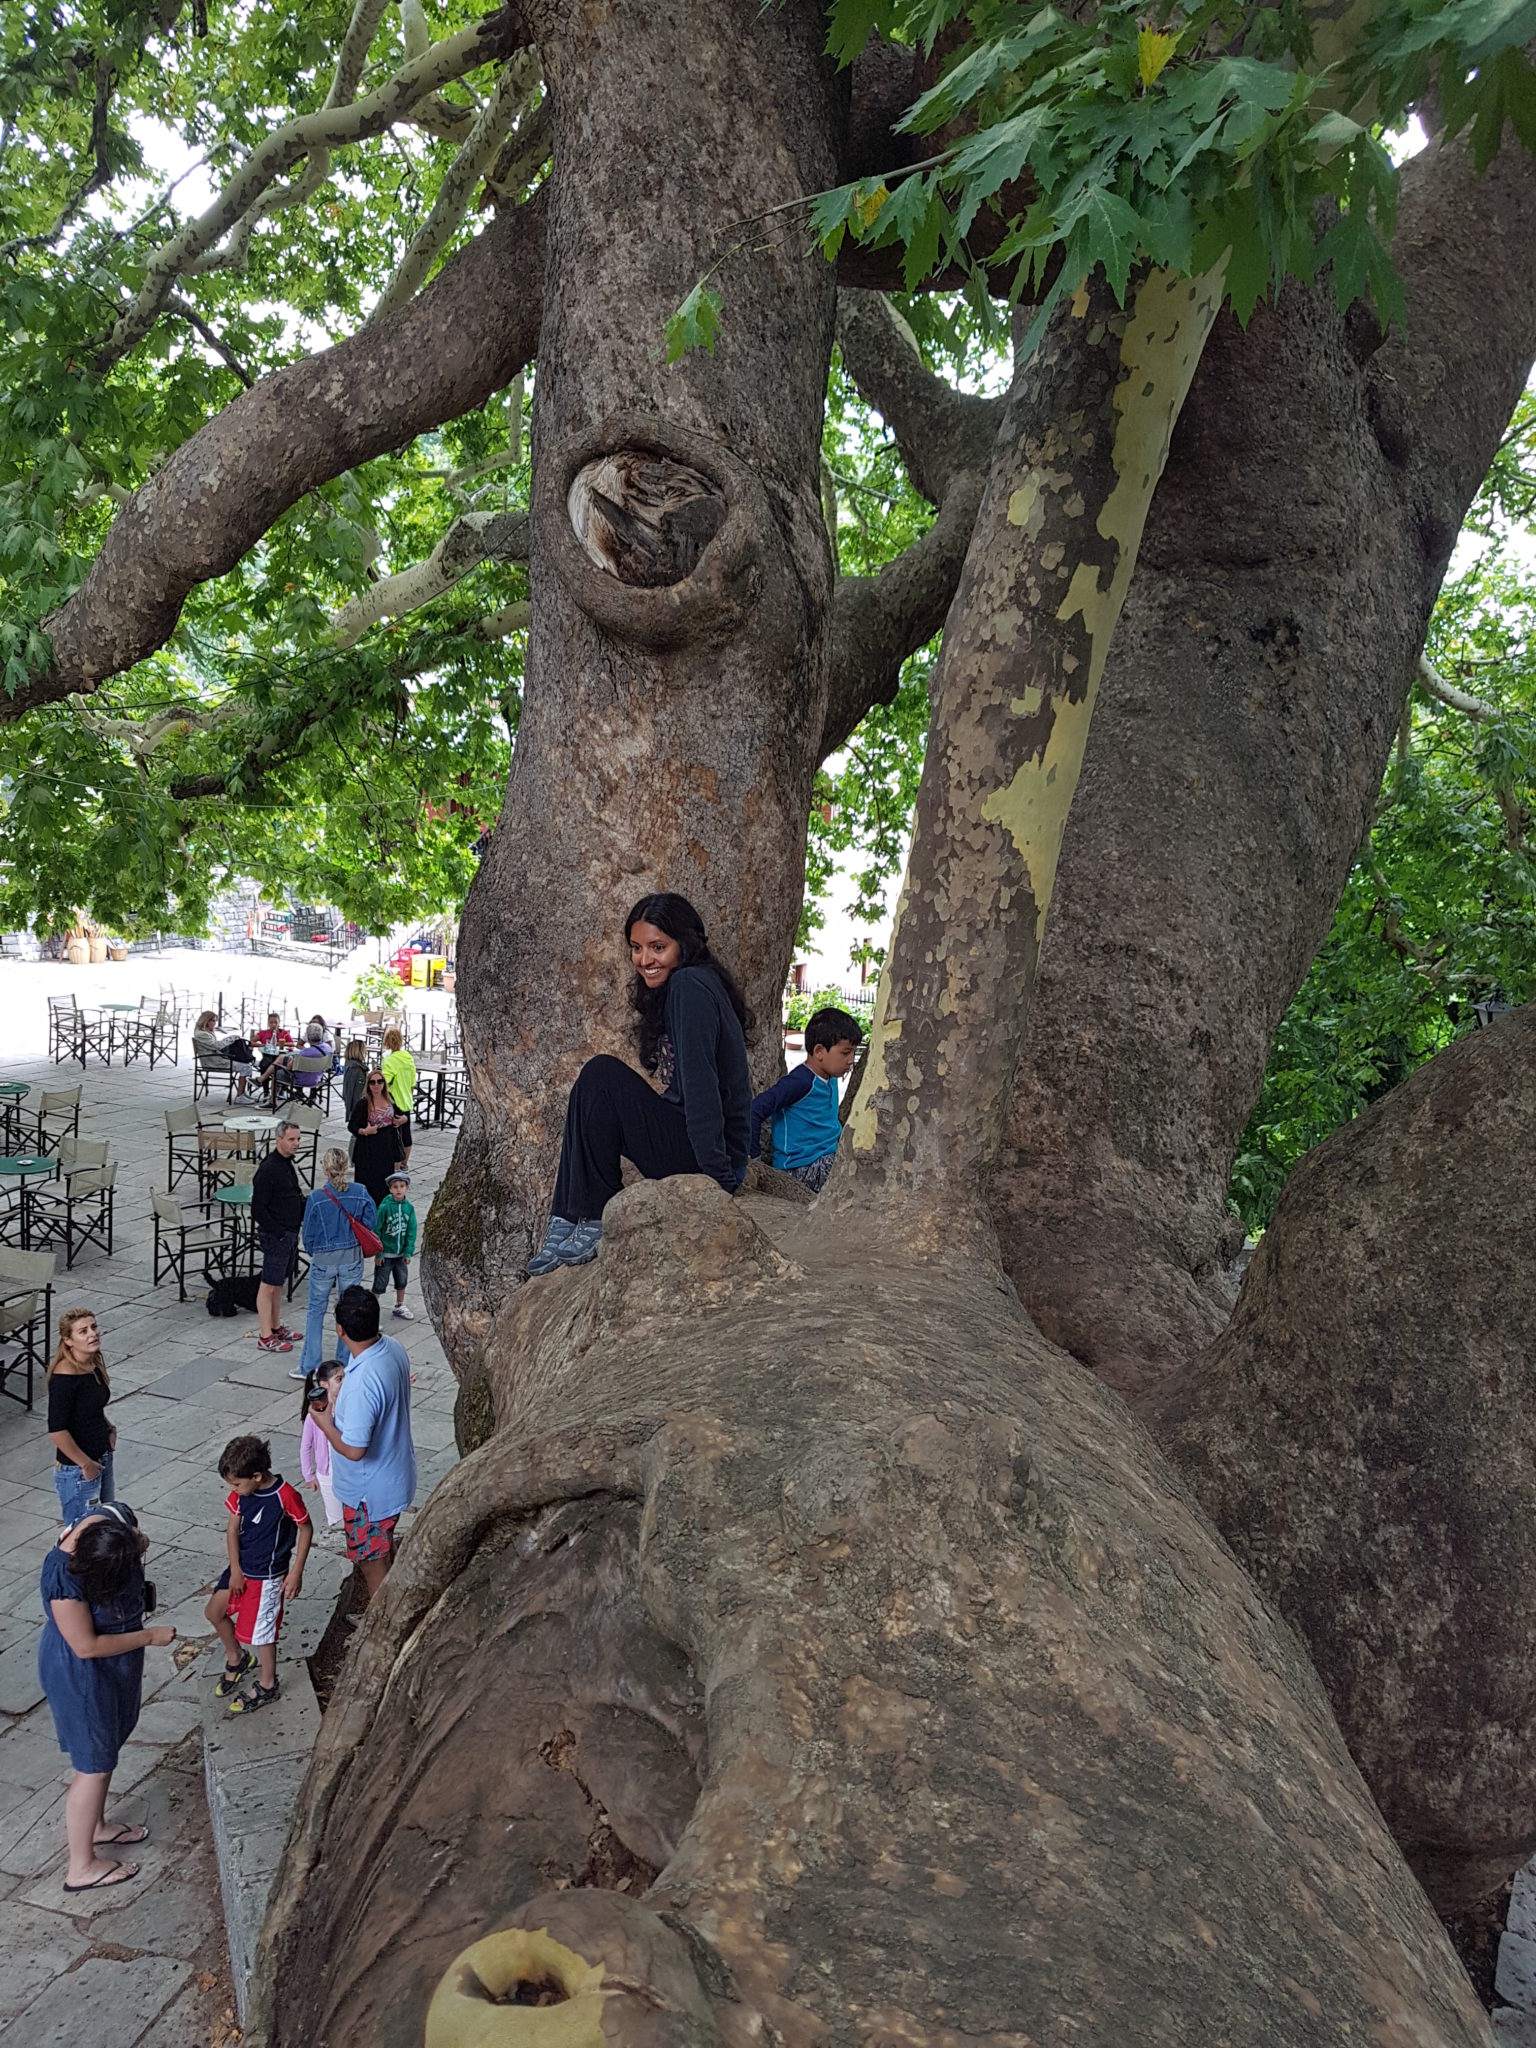 our Bollywood dance instructor sits in the oldest plane tree in Greece, 2000 years old and counting. Tsagarada